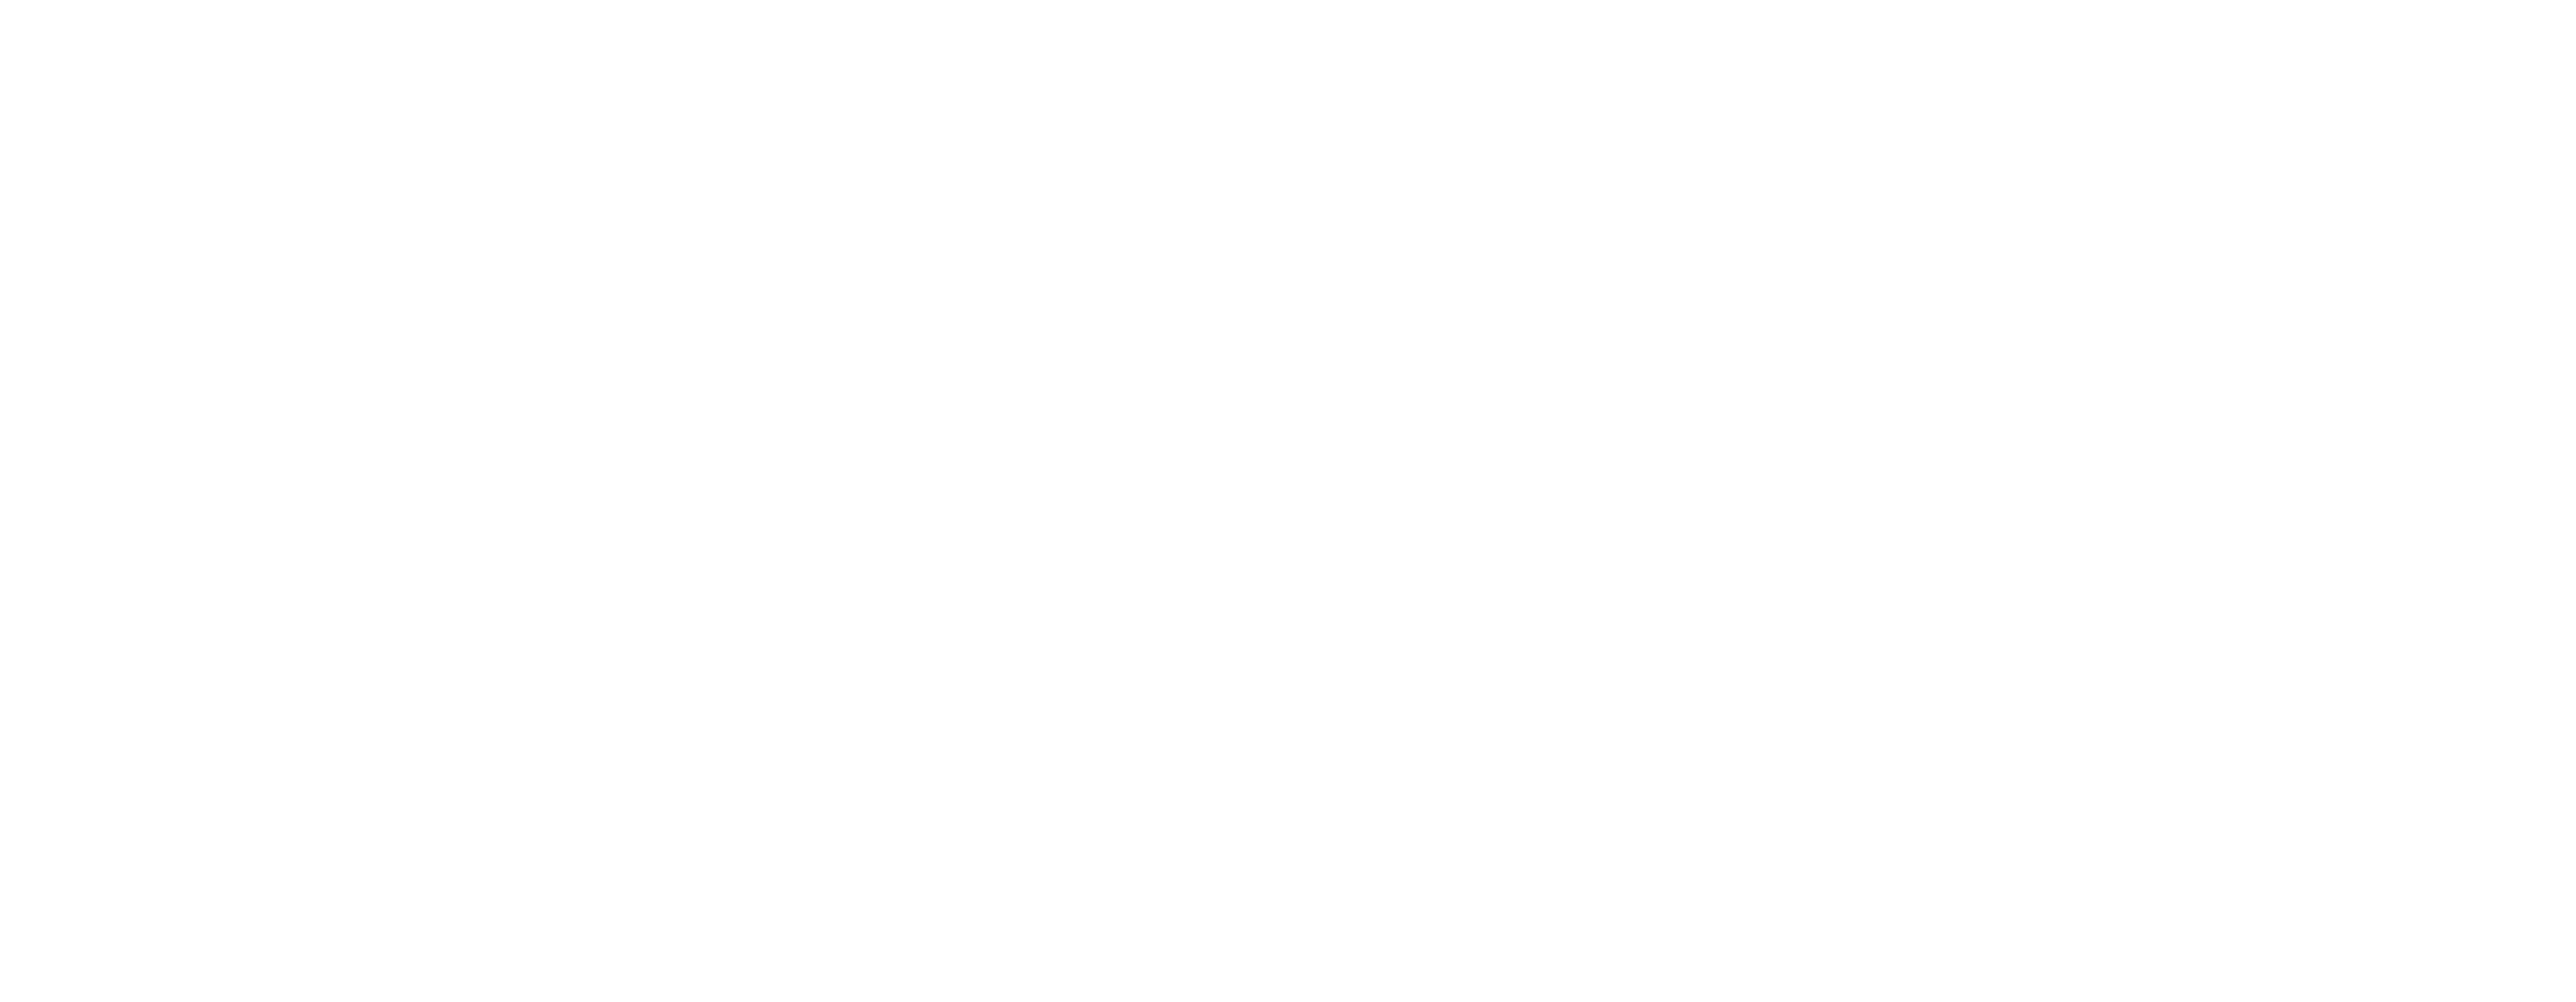 Vietnam: The Real War, Photographs by The Associated Press, Organized by the Huntsville Museum of Art